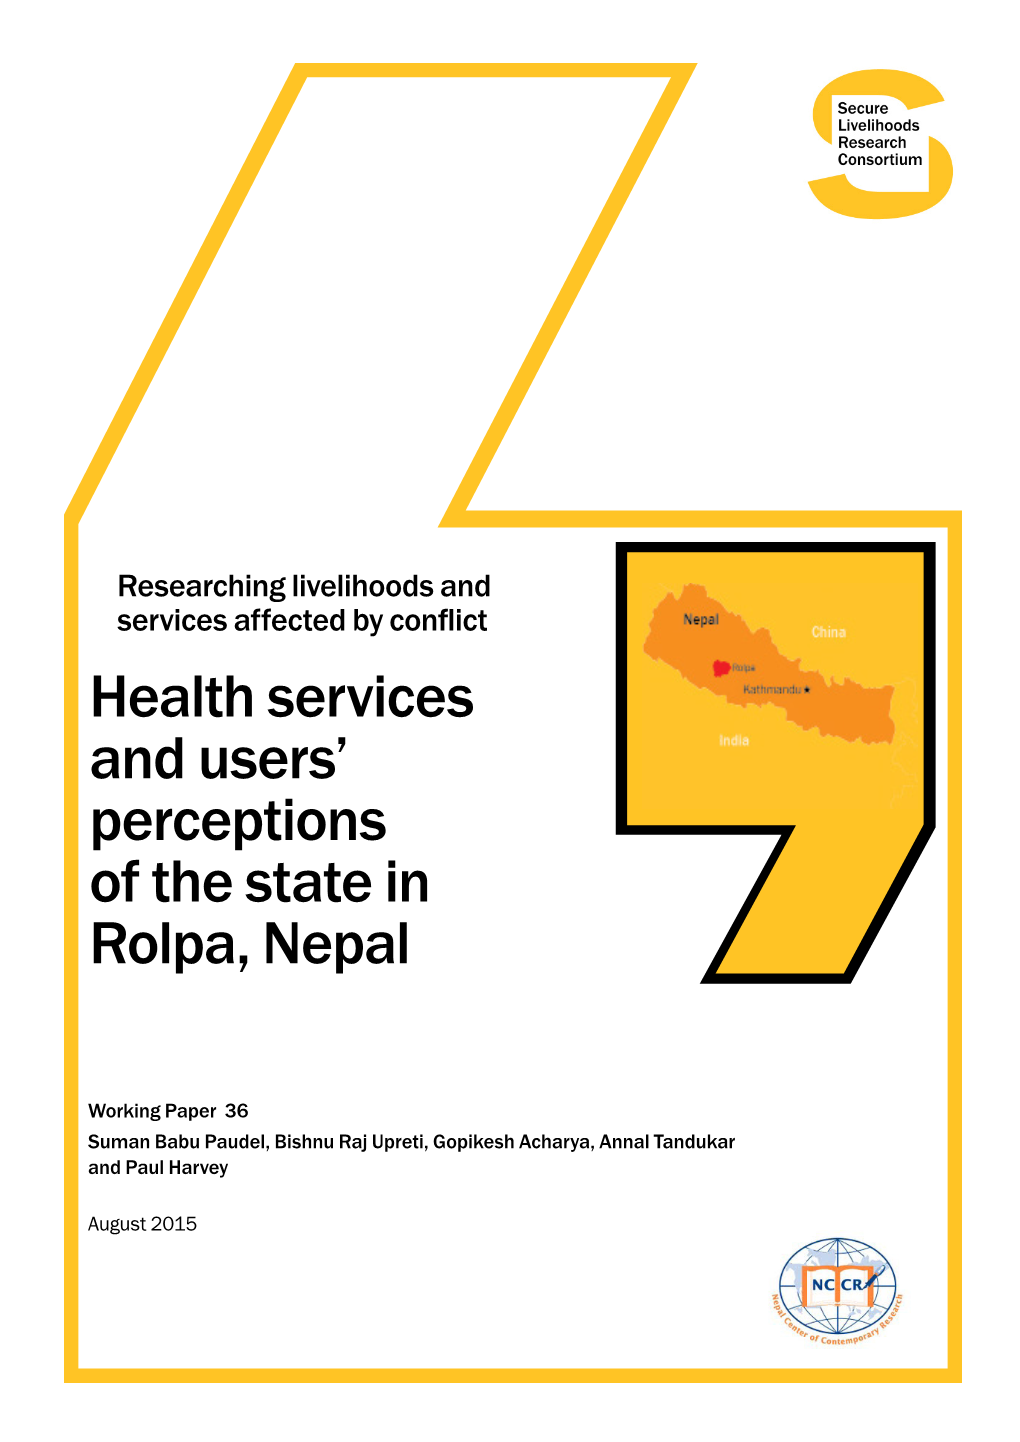 Health Services and Users' Perceptions of the State in Rolpa